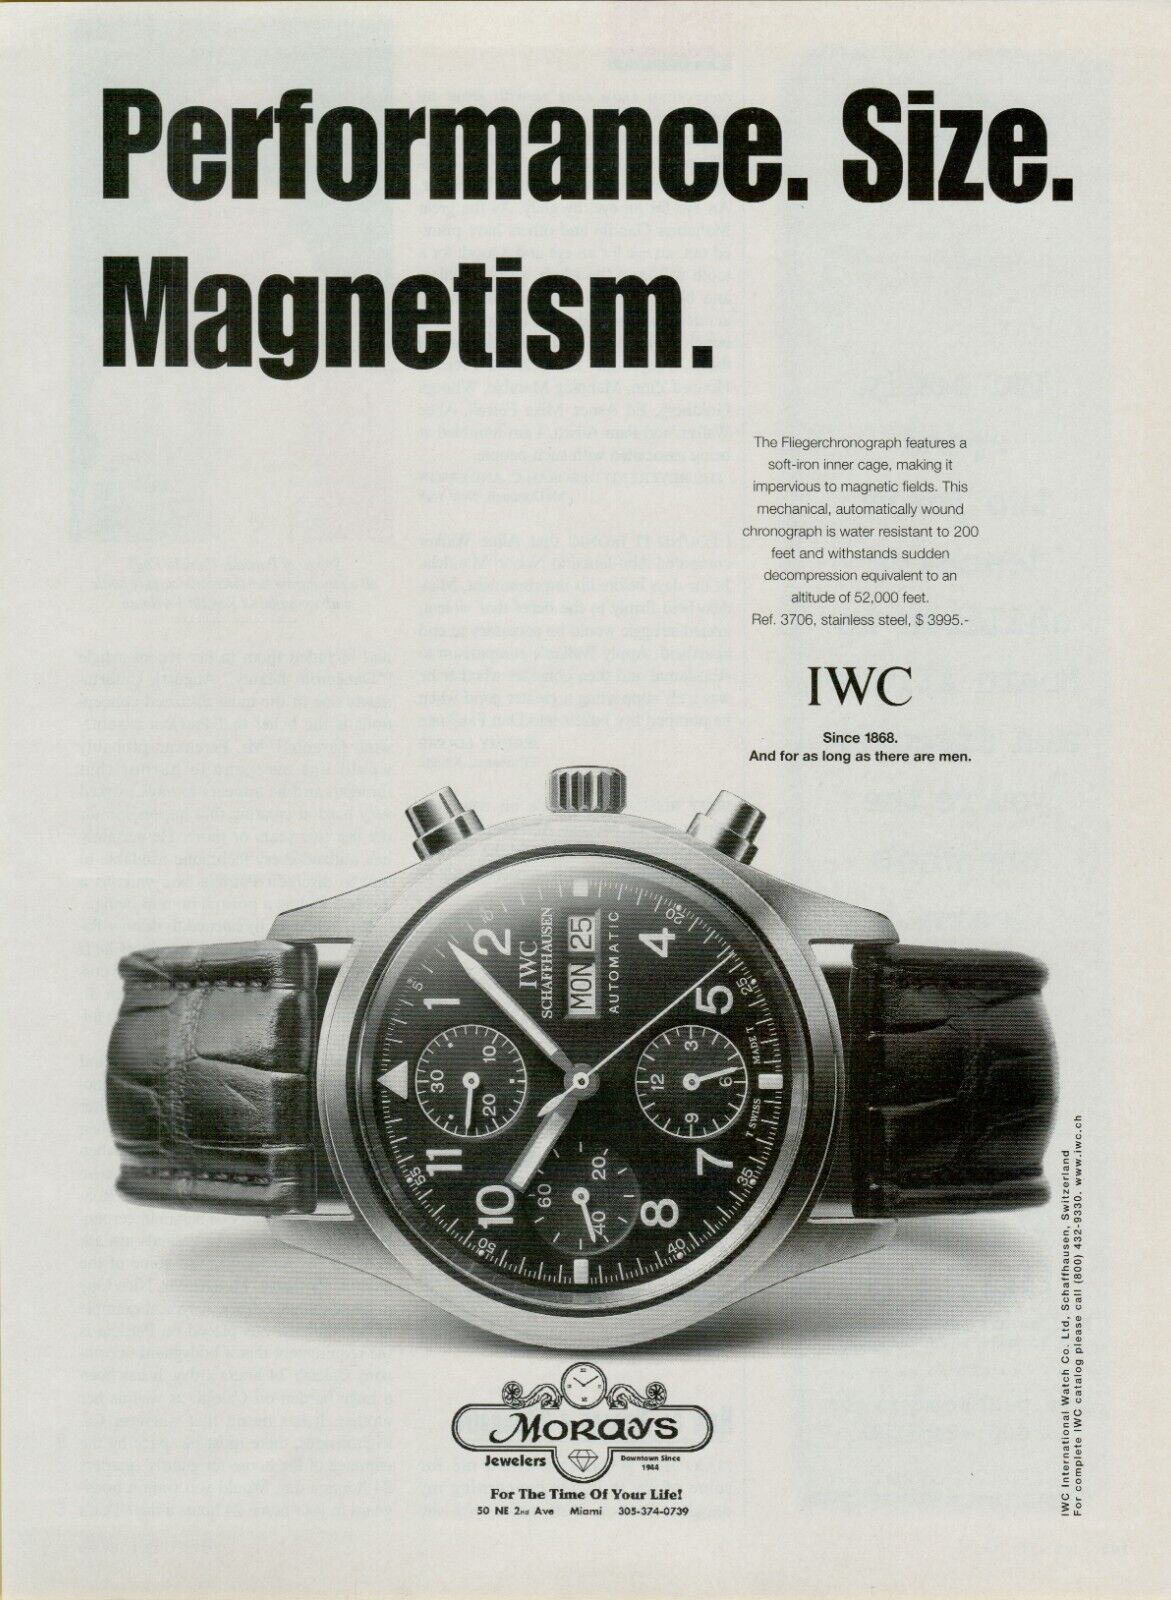 1999 IWC International Watch Co Performance Size Magnetism Vintage Print Ad x